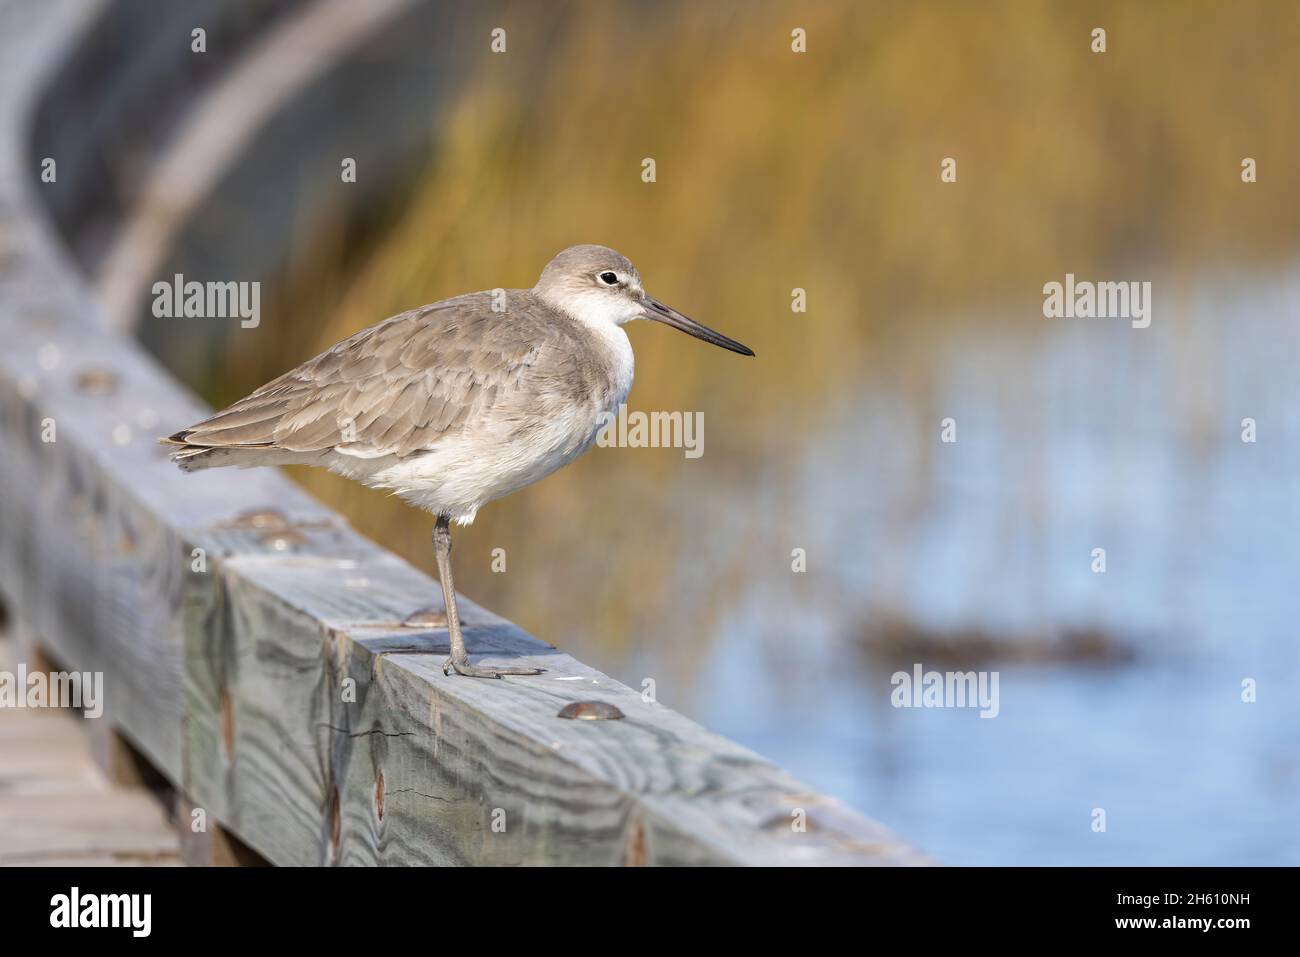 A willet (Tringa semipalmata) perched on the edge of a boardwalk along an estuary in St. Augustine, Florida. Stock Photo